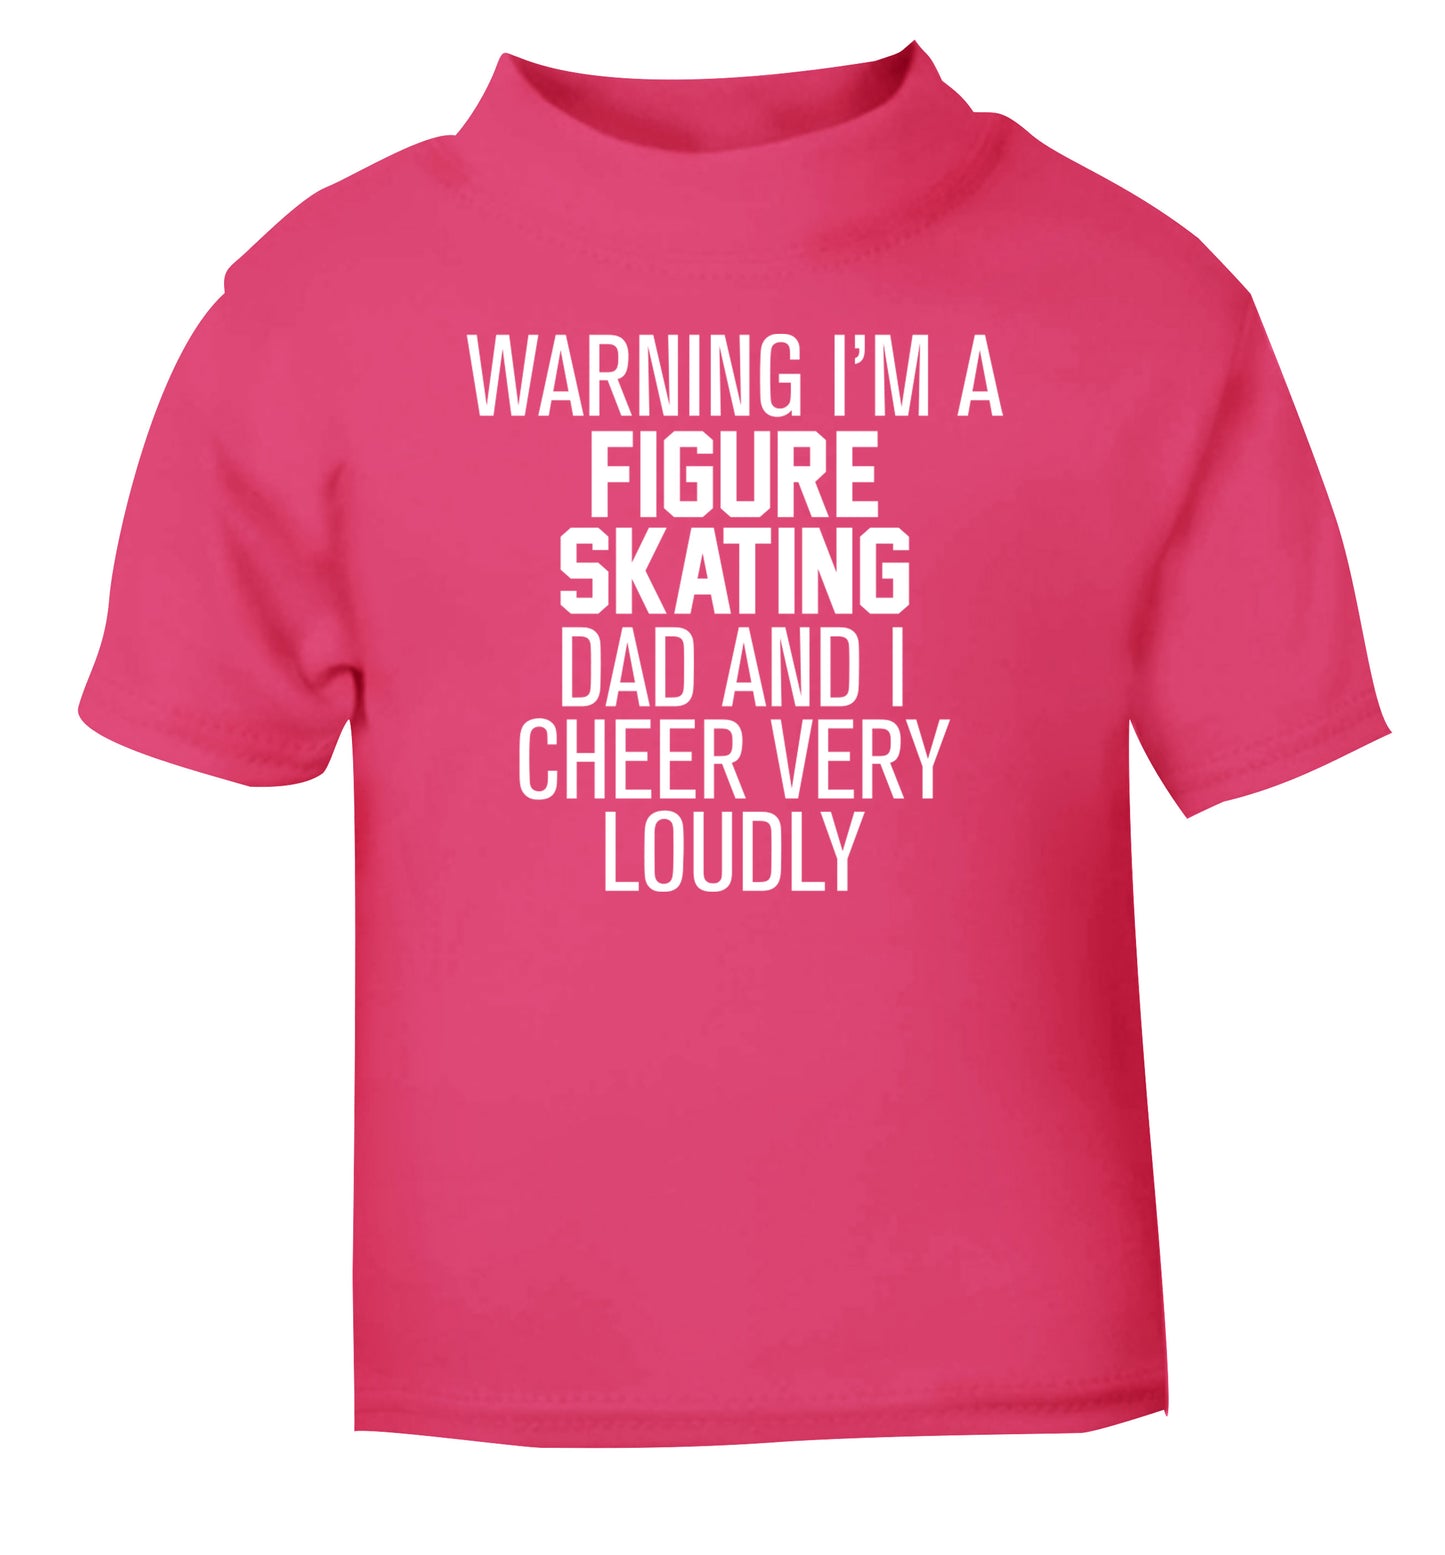 Warning I'm a figure skating dad and I cheer very loudly pink Baby Toddler Tshirt 2 Years